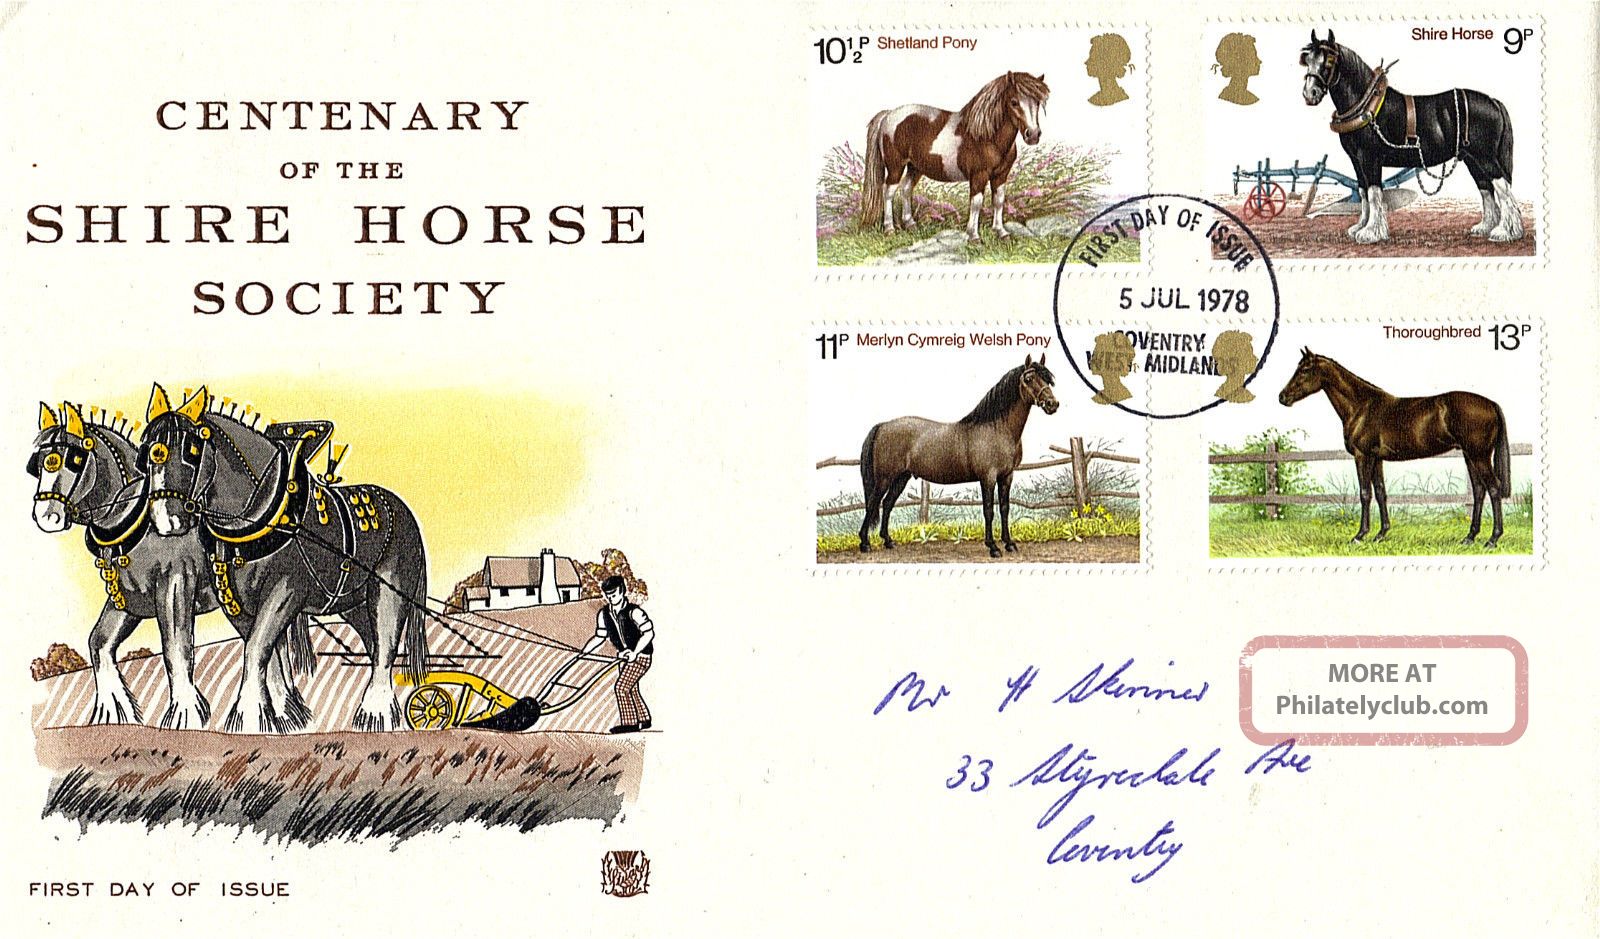 5 July 1978 Shire Horses Stuart First Day Cover Coventry Fdi Animal Kingdom photo